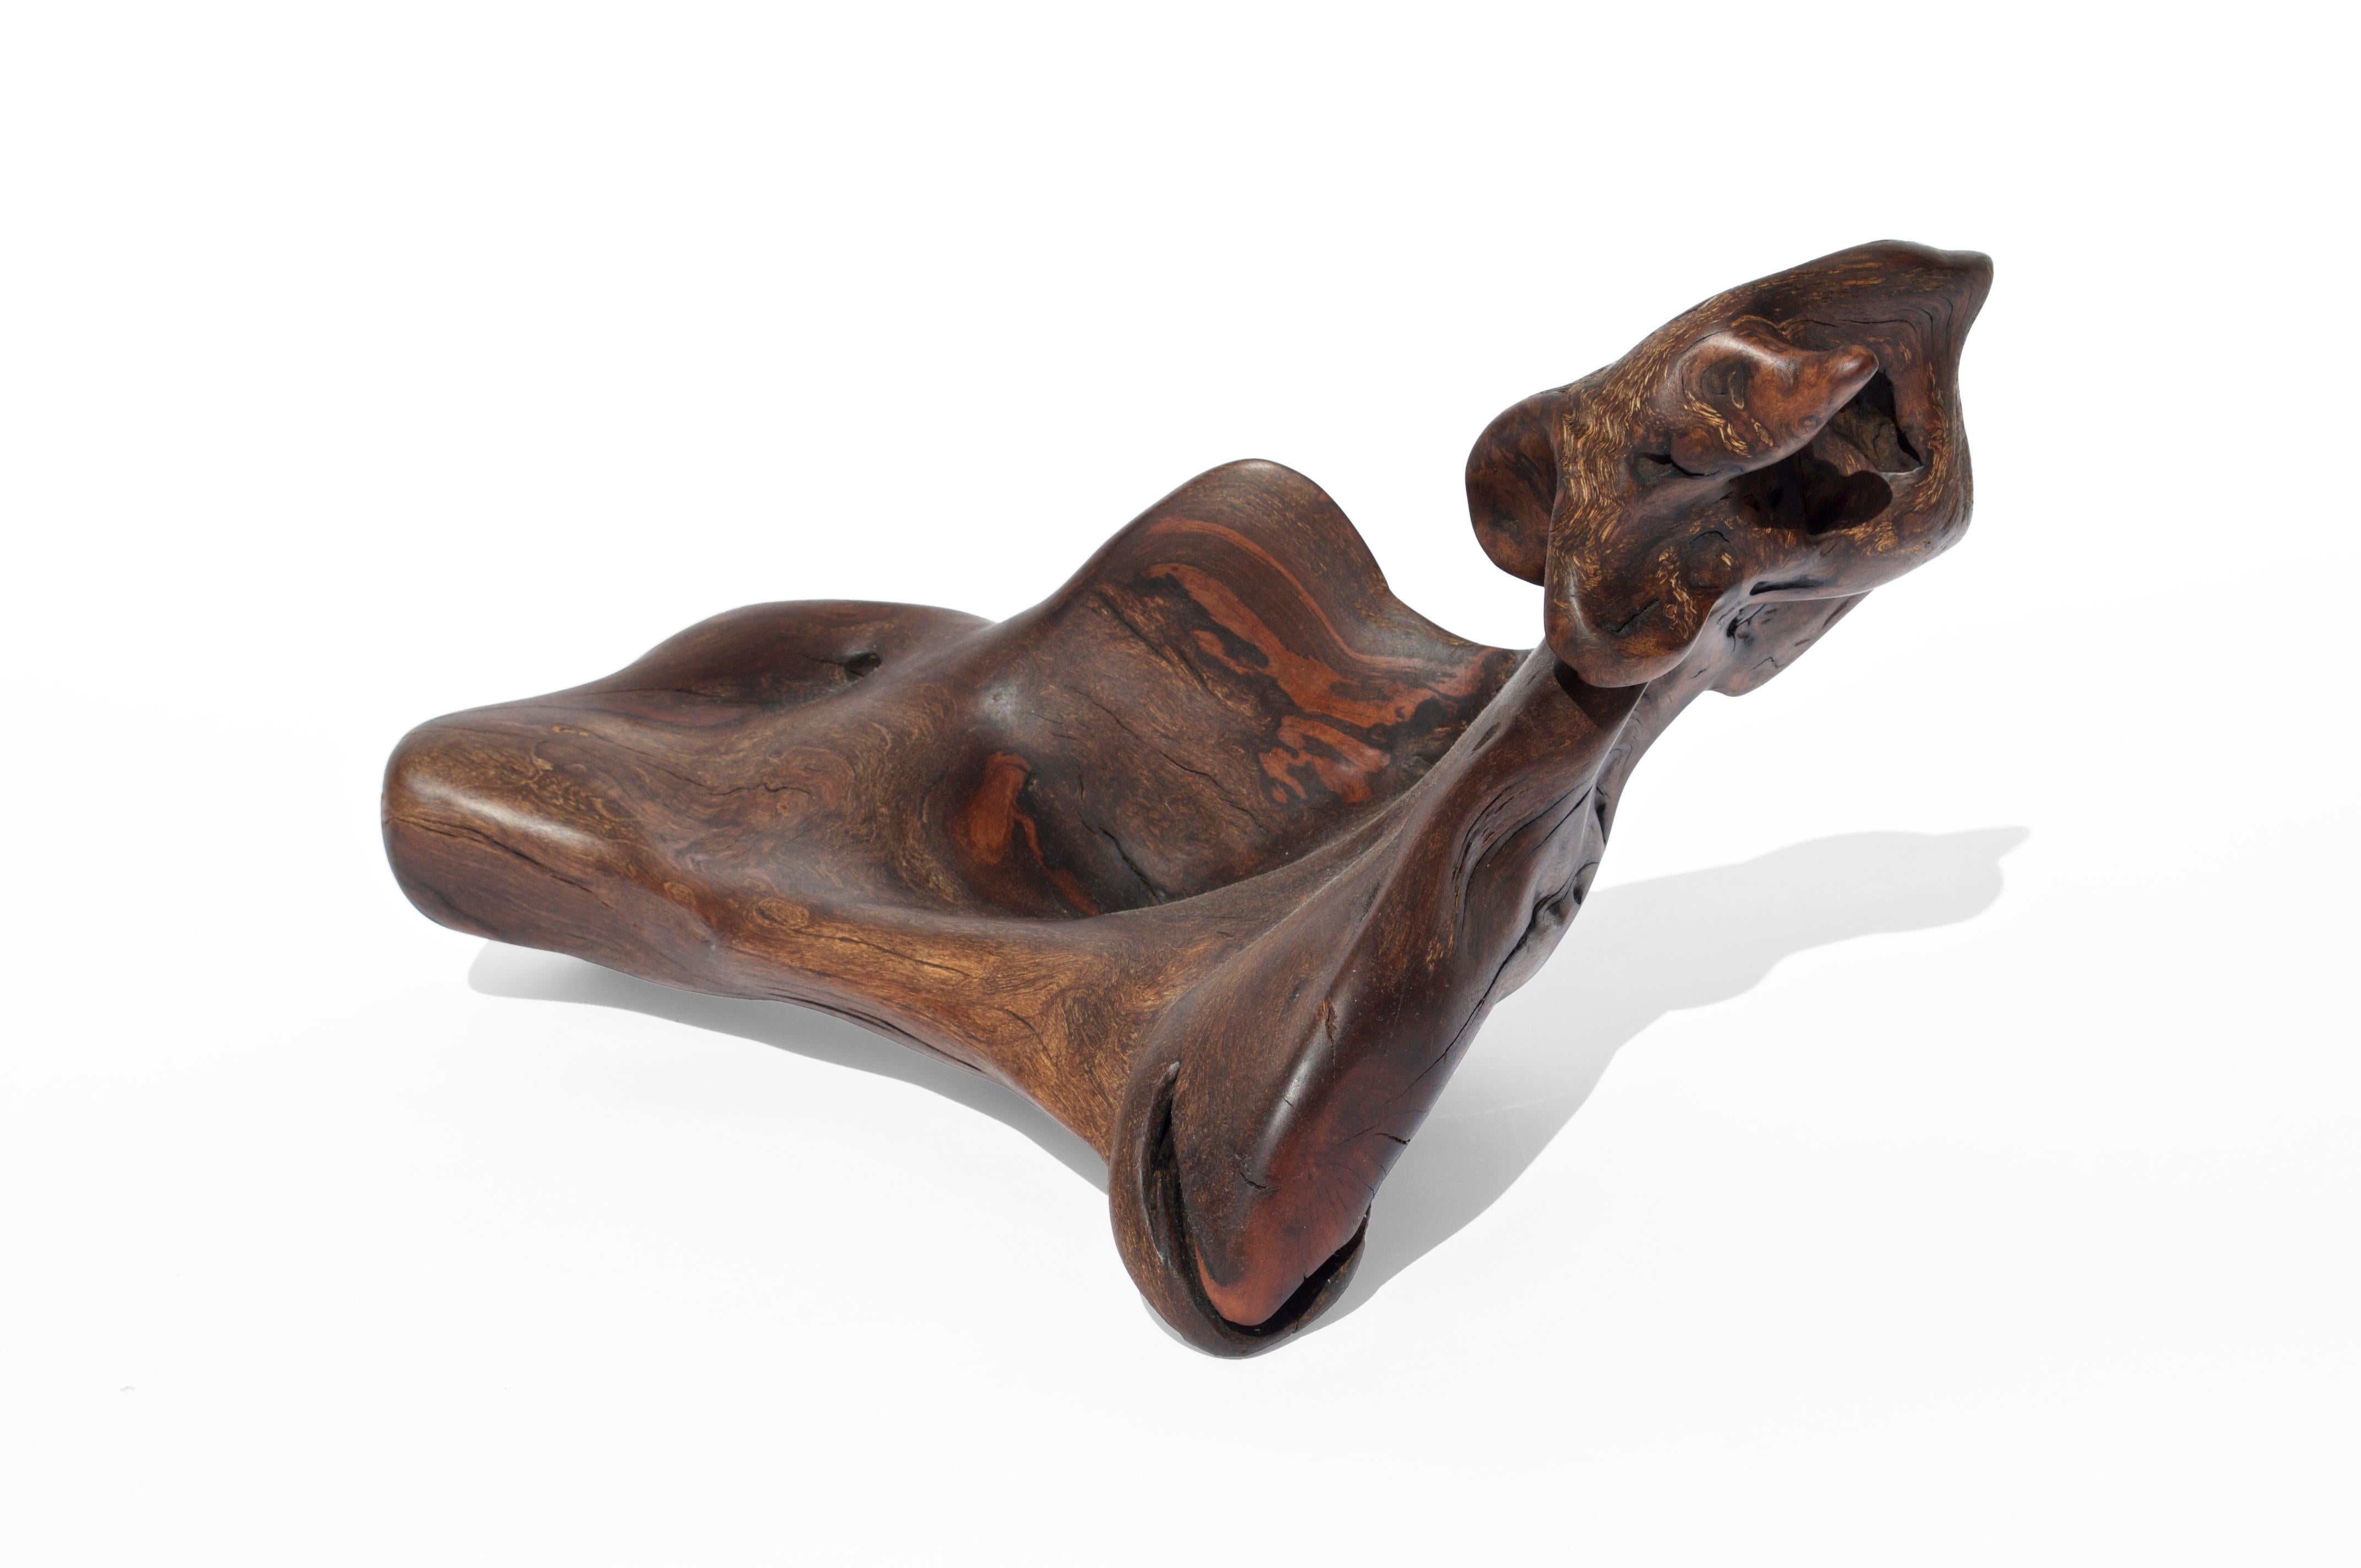 Driftwood vessel 2730 by Jörg Pietschmann
Dimensions: D 34 x W 47 x H 25.5 cm 
Materials: Driftwood 
Finish: Polished oil finish.


In Pietschmann’s sculptures, trees that for centuries were part of a landscape and founded in primordial forces